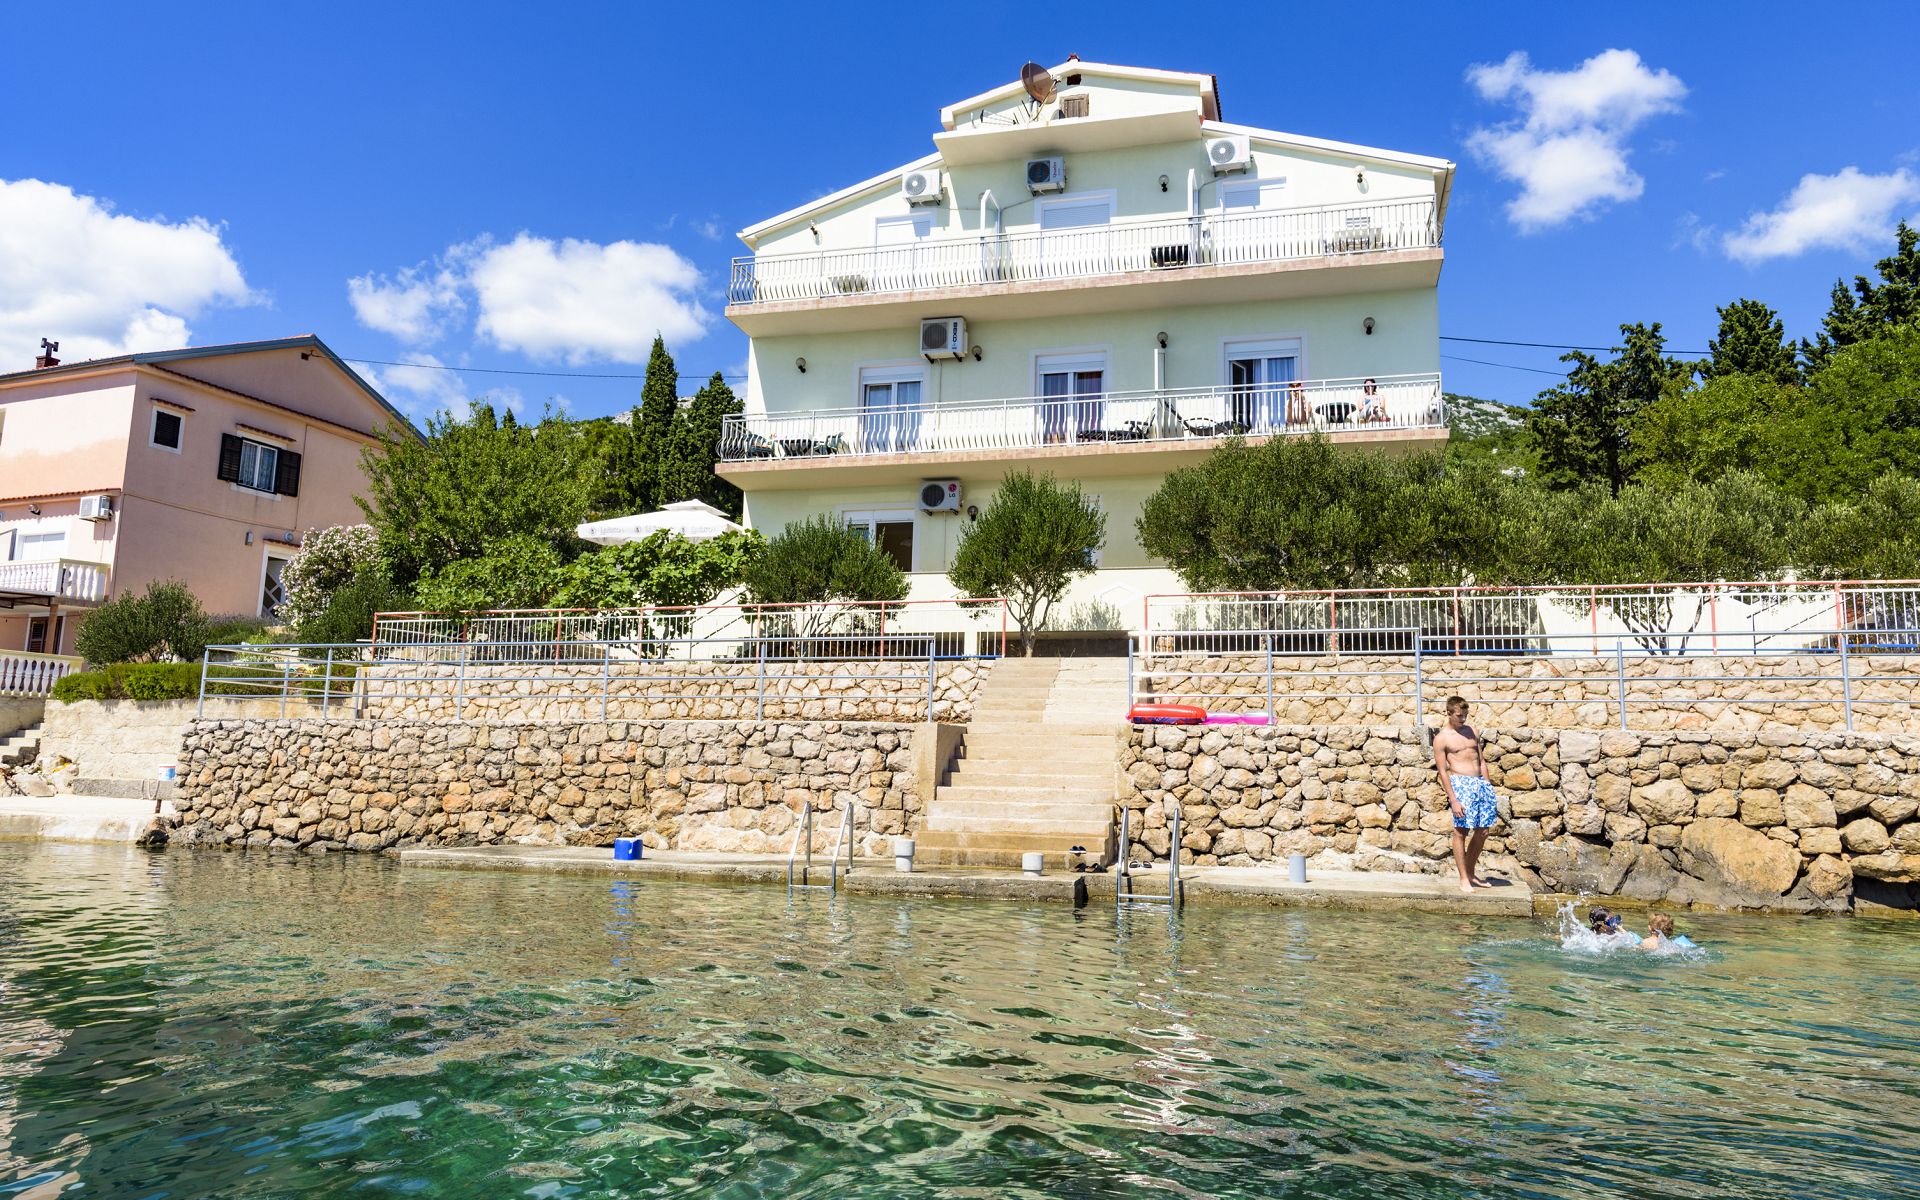 Apartments Toma - 5m from the sea with parking: A1(2+2), A2(2+2), SA3(2) Lukovo Sugarje - Riviera Senj 